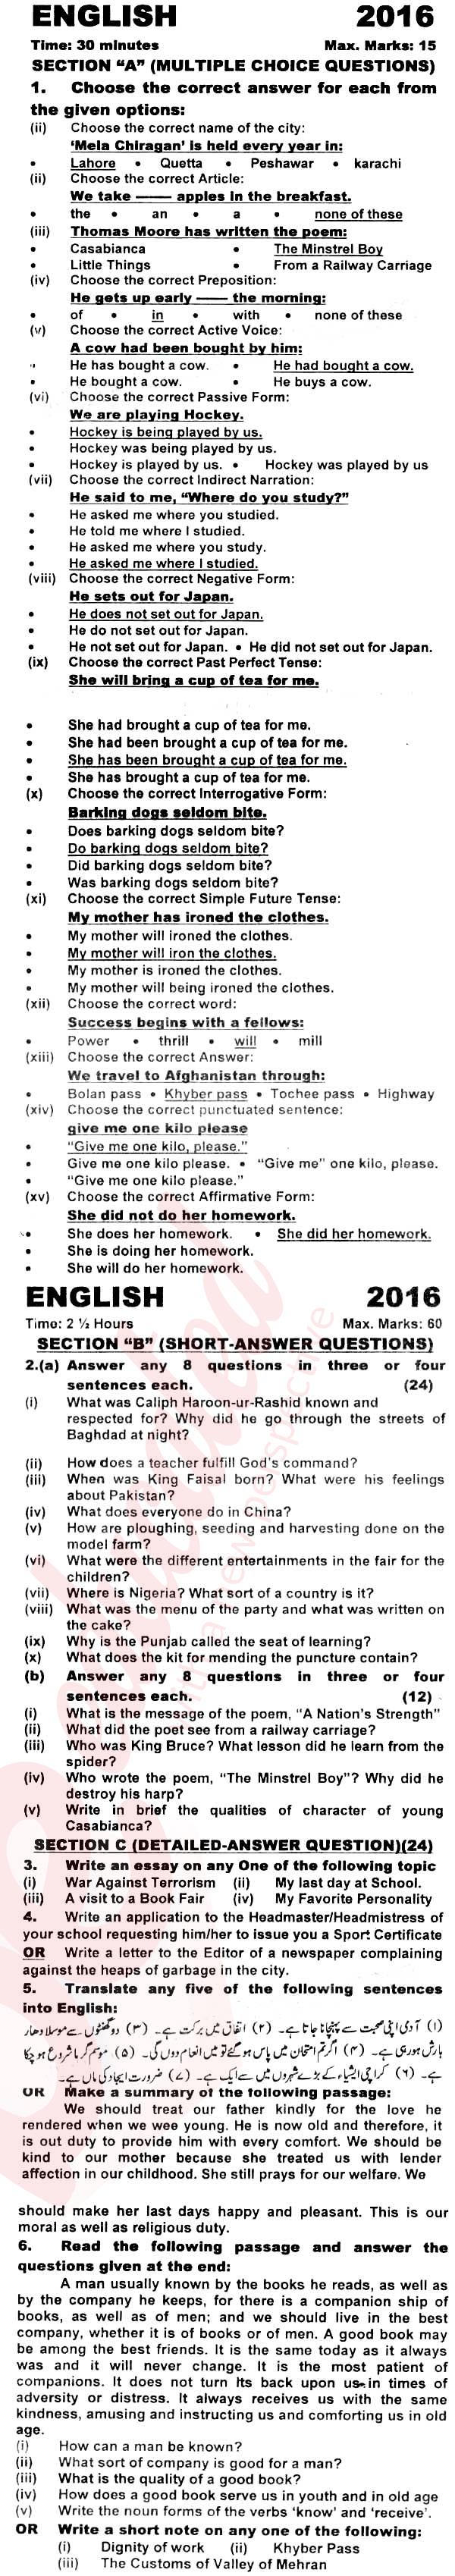 English 10th class Past Paper Group 1 KPBTE 2016